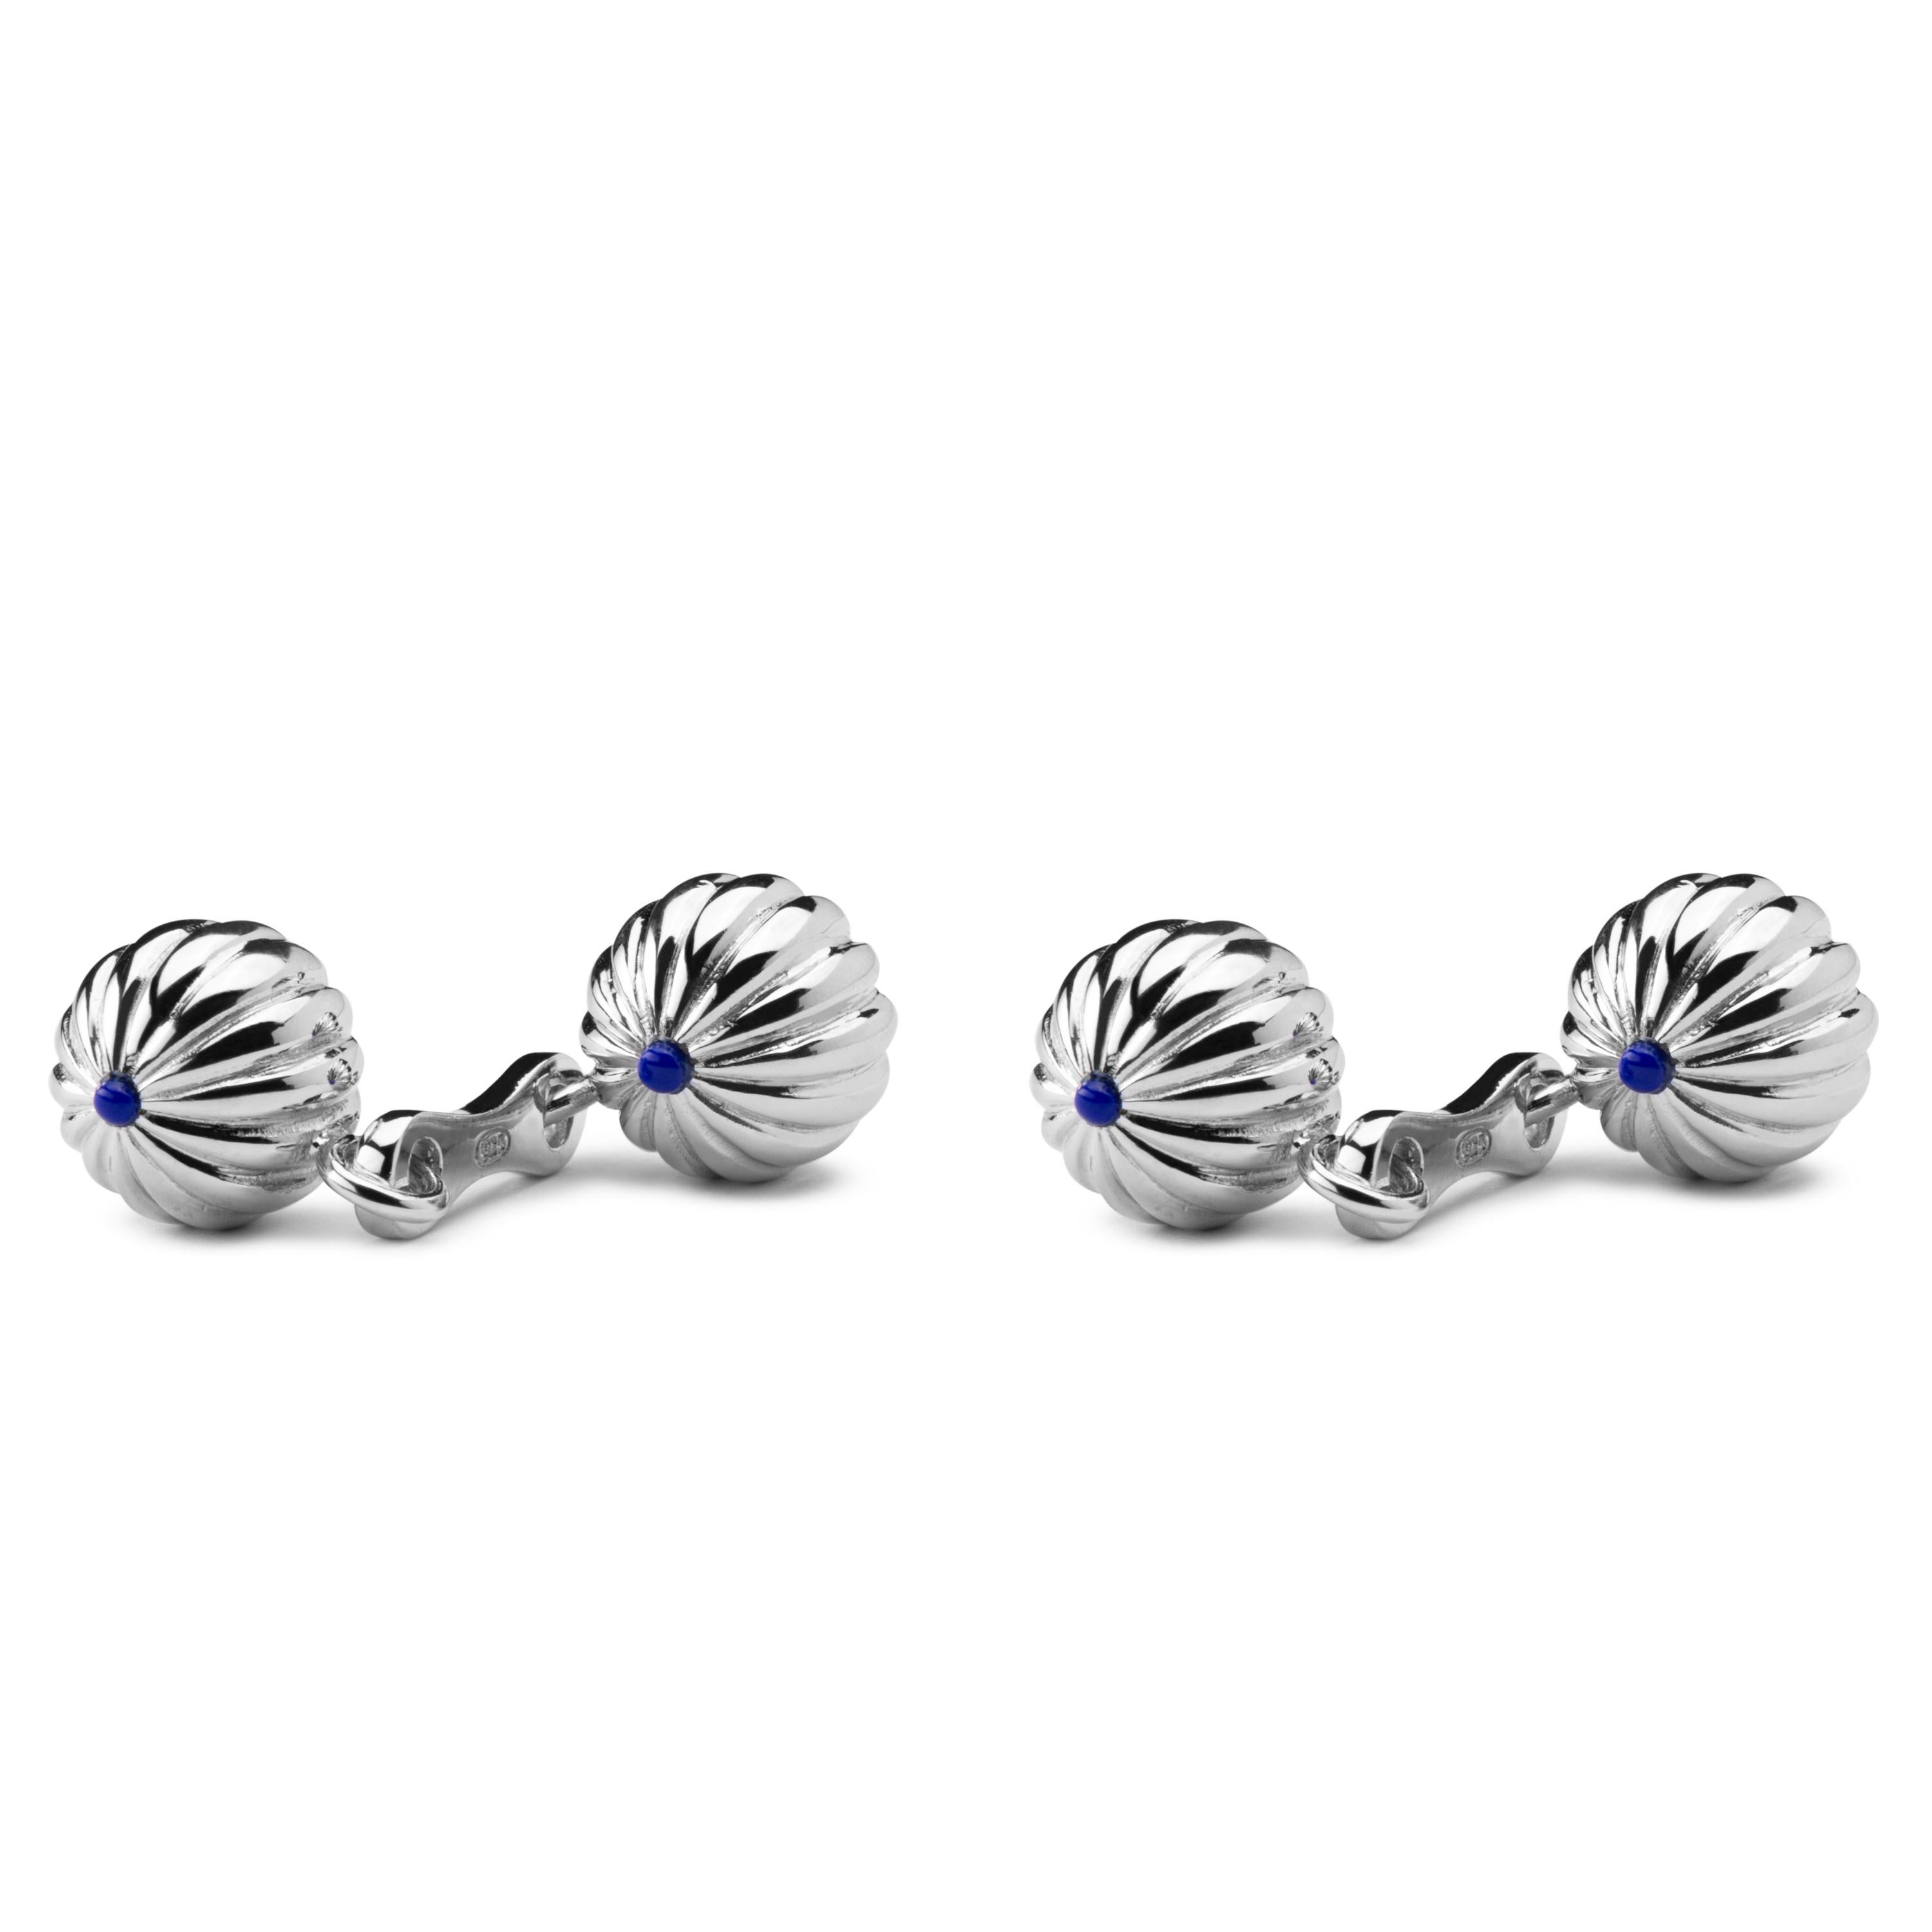 Jona design collection, hand crafted in Italy, rhodium plated Sterling Silver cufflinks with lapis cabochon.  
Dimensions:
Dm 10.26mm / Dm 0.40in
All Jona jewelry is new and has never been previously owned or worn. Each item will arrive at your door